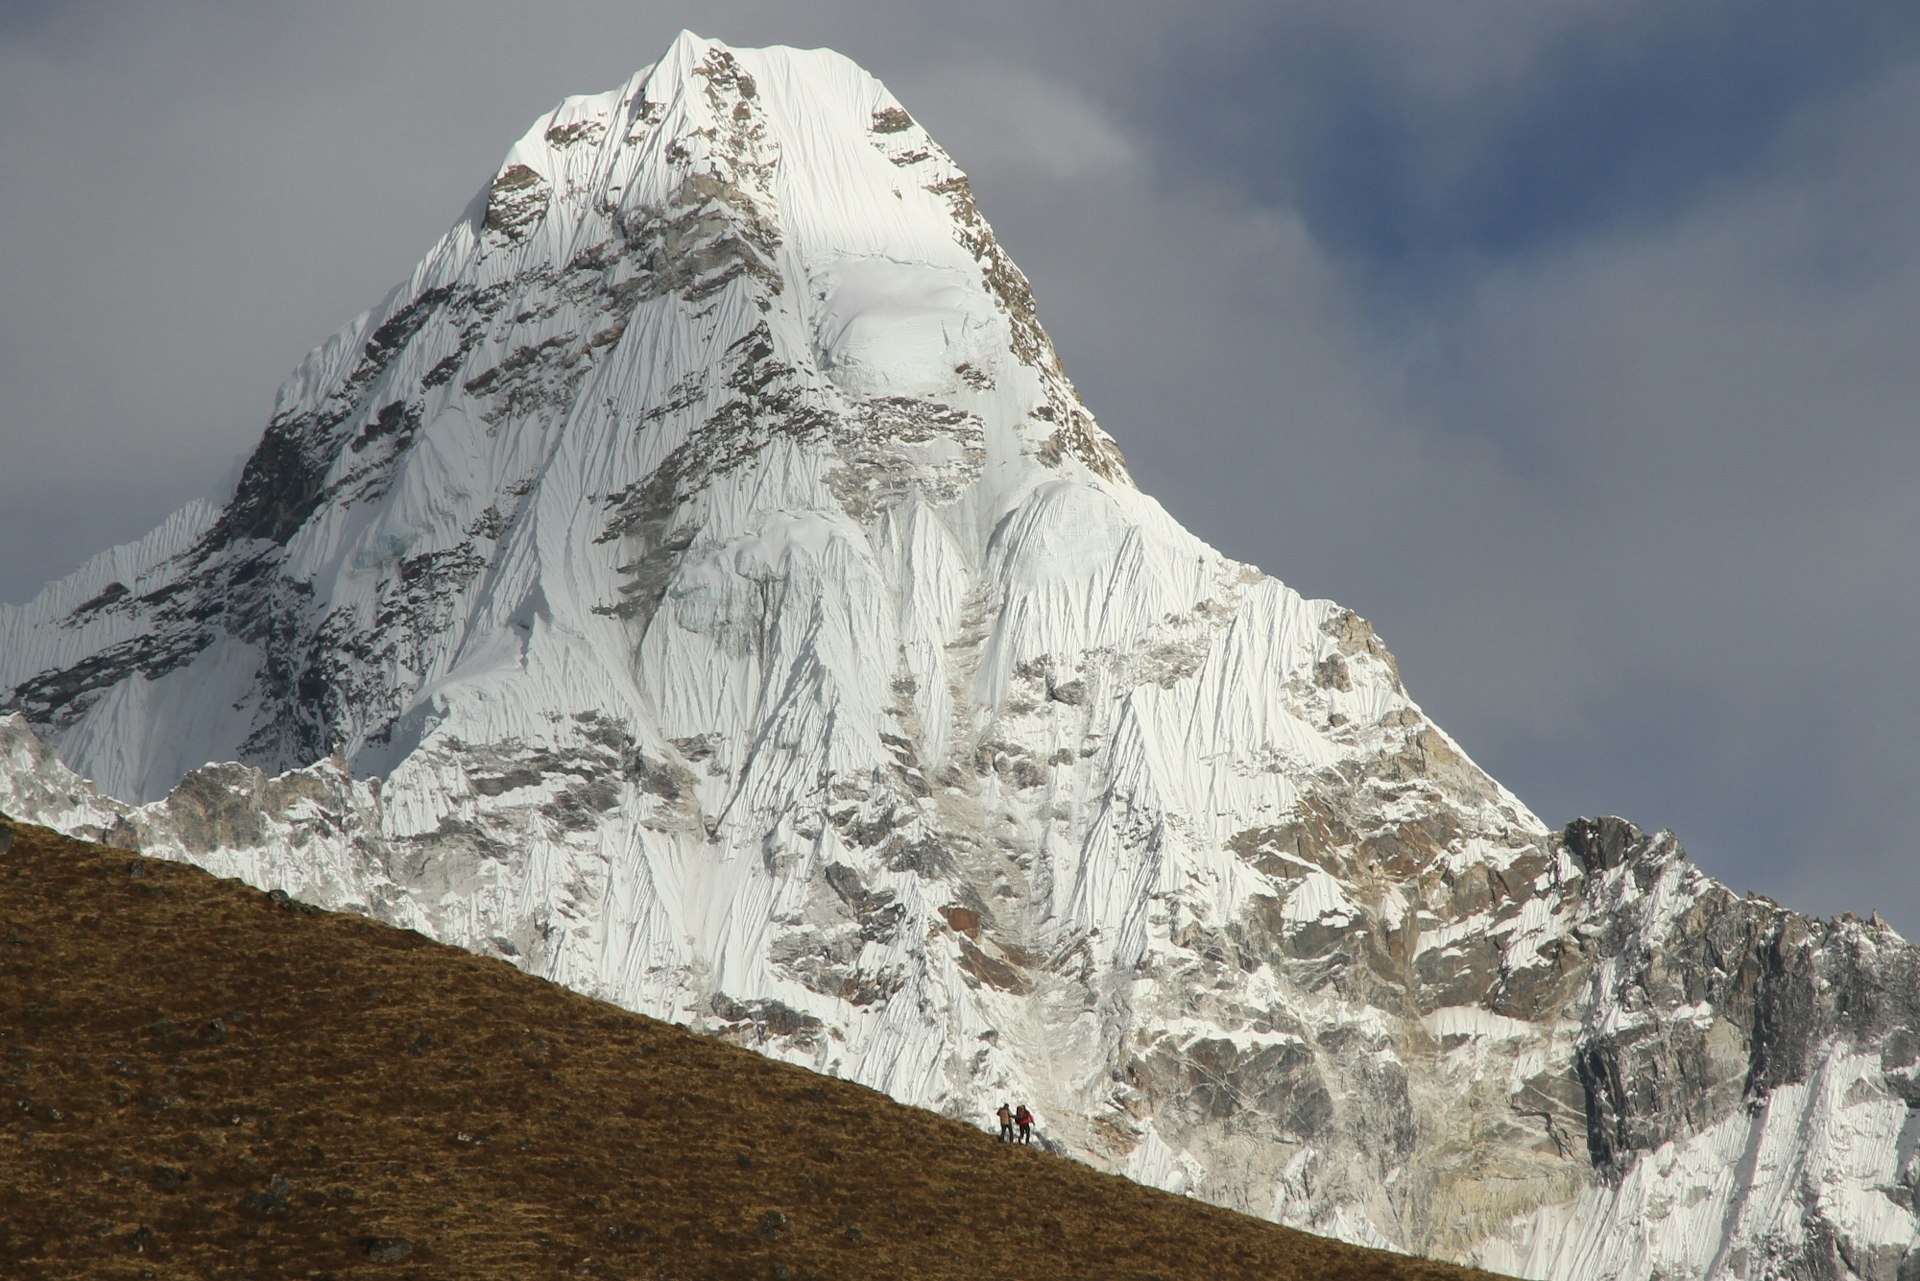 View of Ama Dablam from above Pangboche. Image by Bradley Mayhew / Lonely Planet